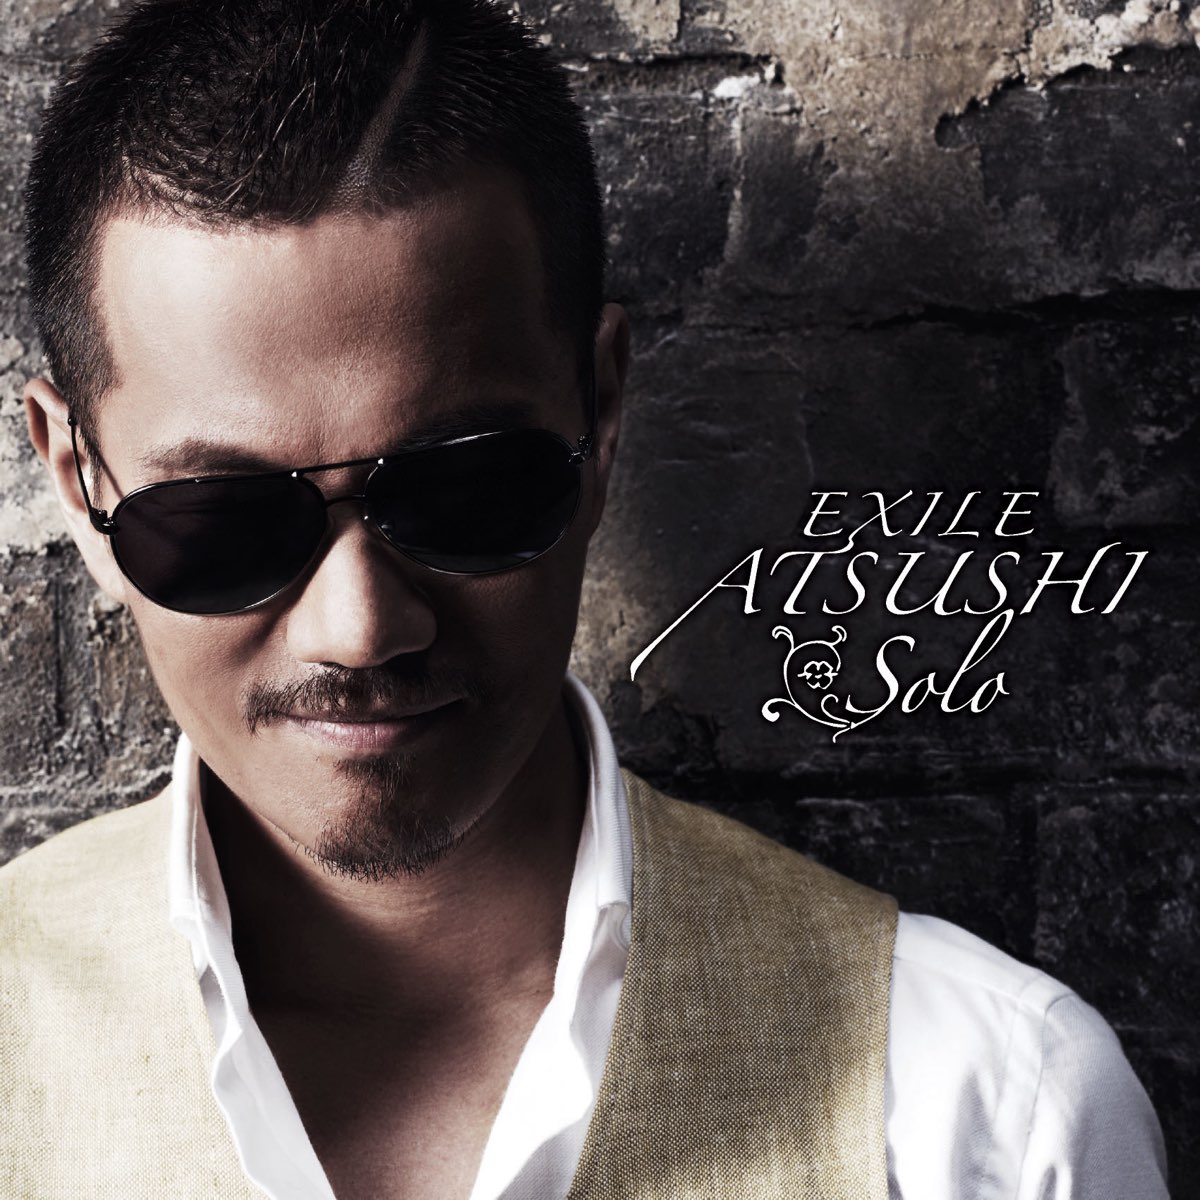 Solo by EXILE ATSUSHI on Apple Music